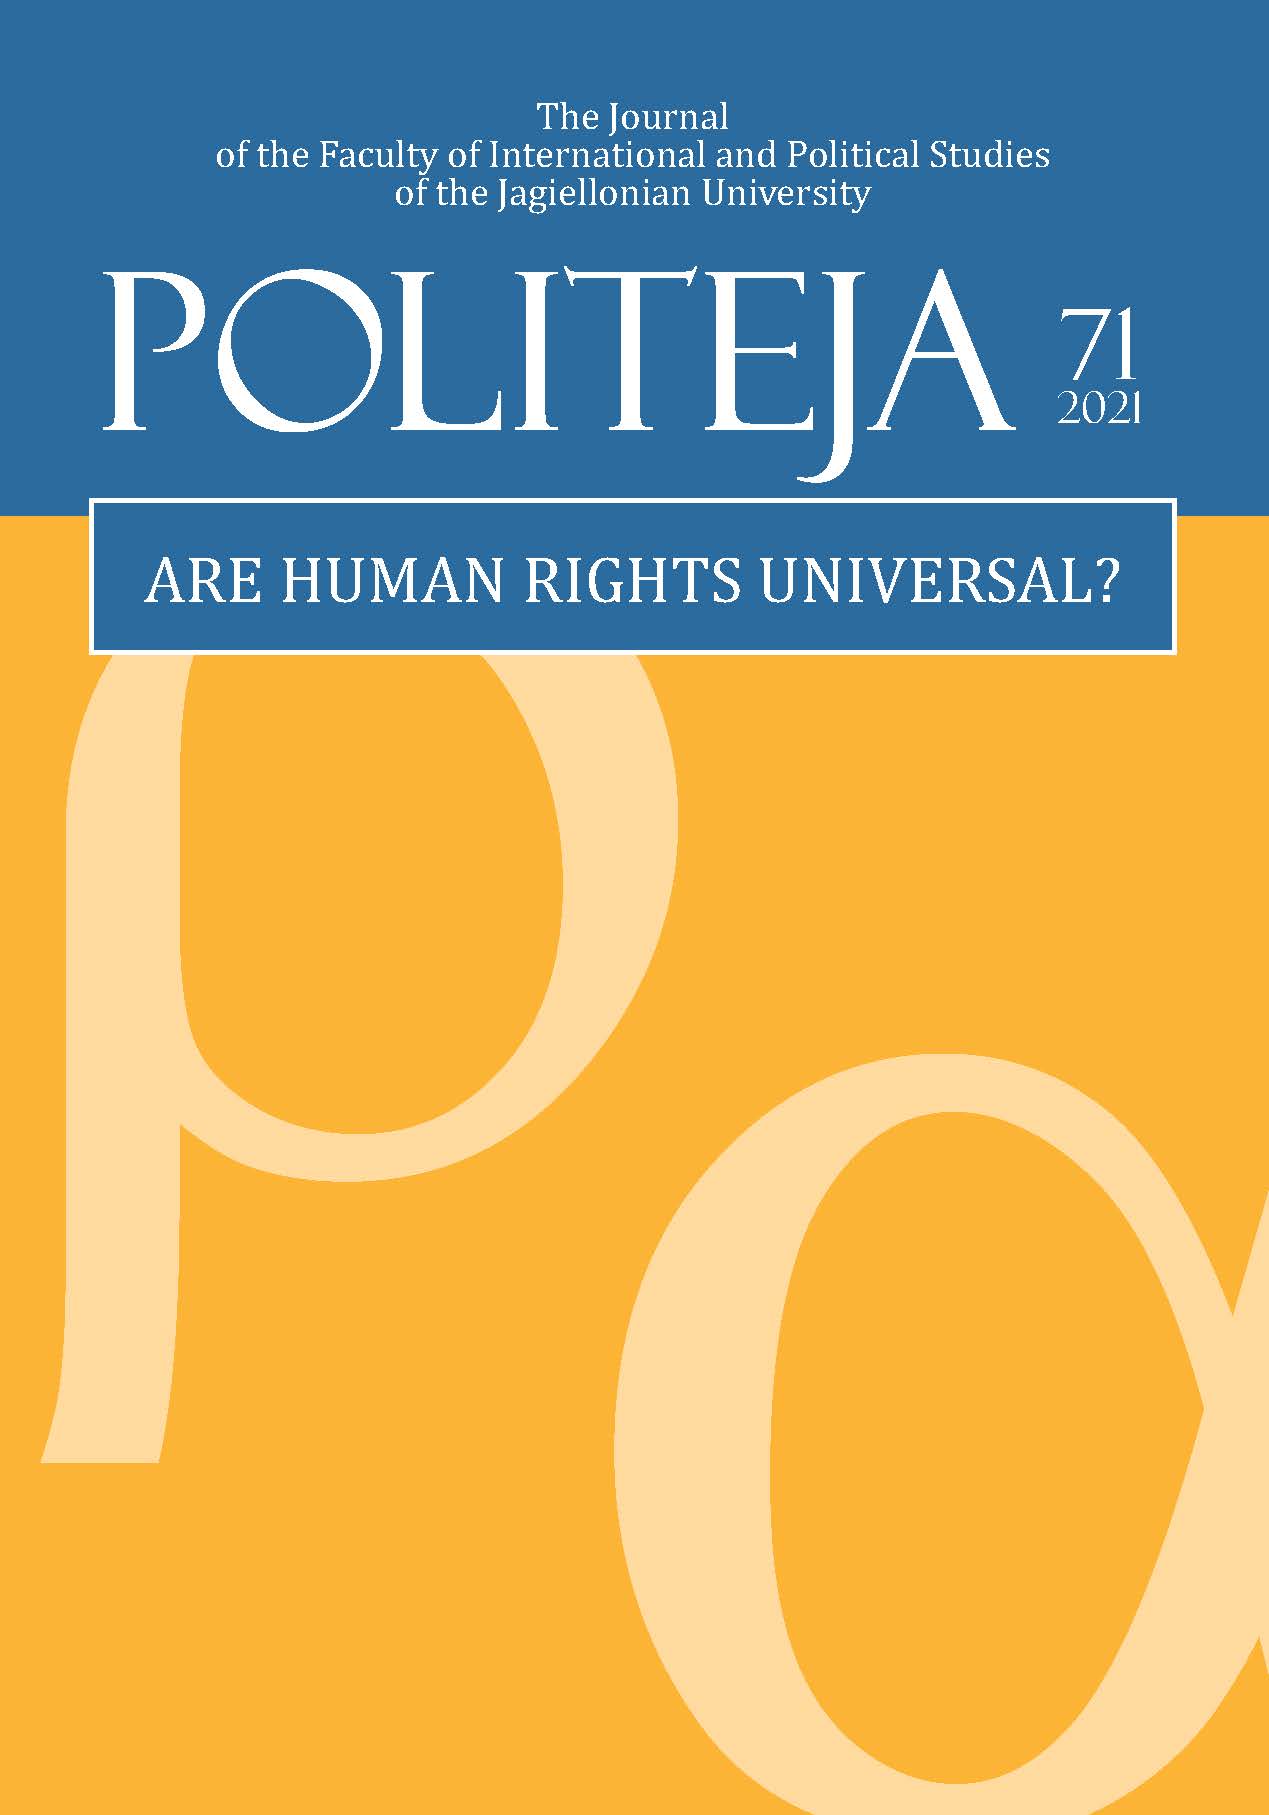 					View Vol. 18 No. 2(71) (2021): Are Human Rights Universal?
				